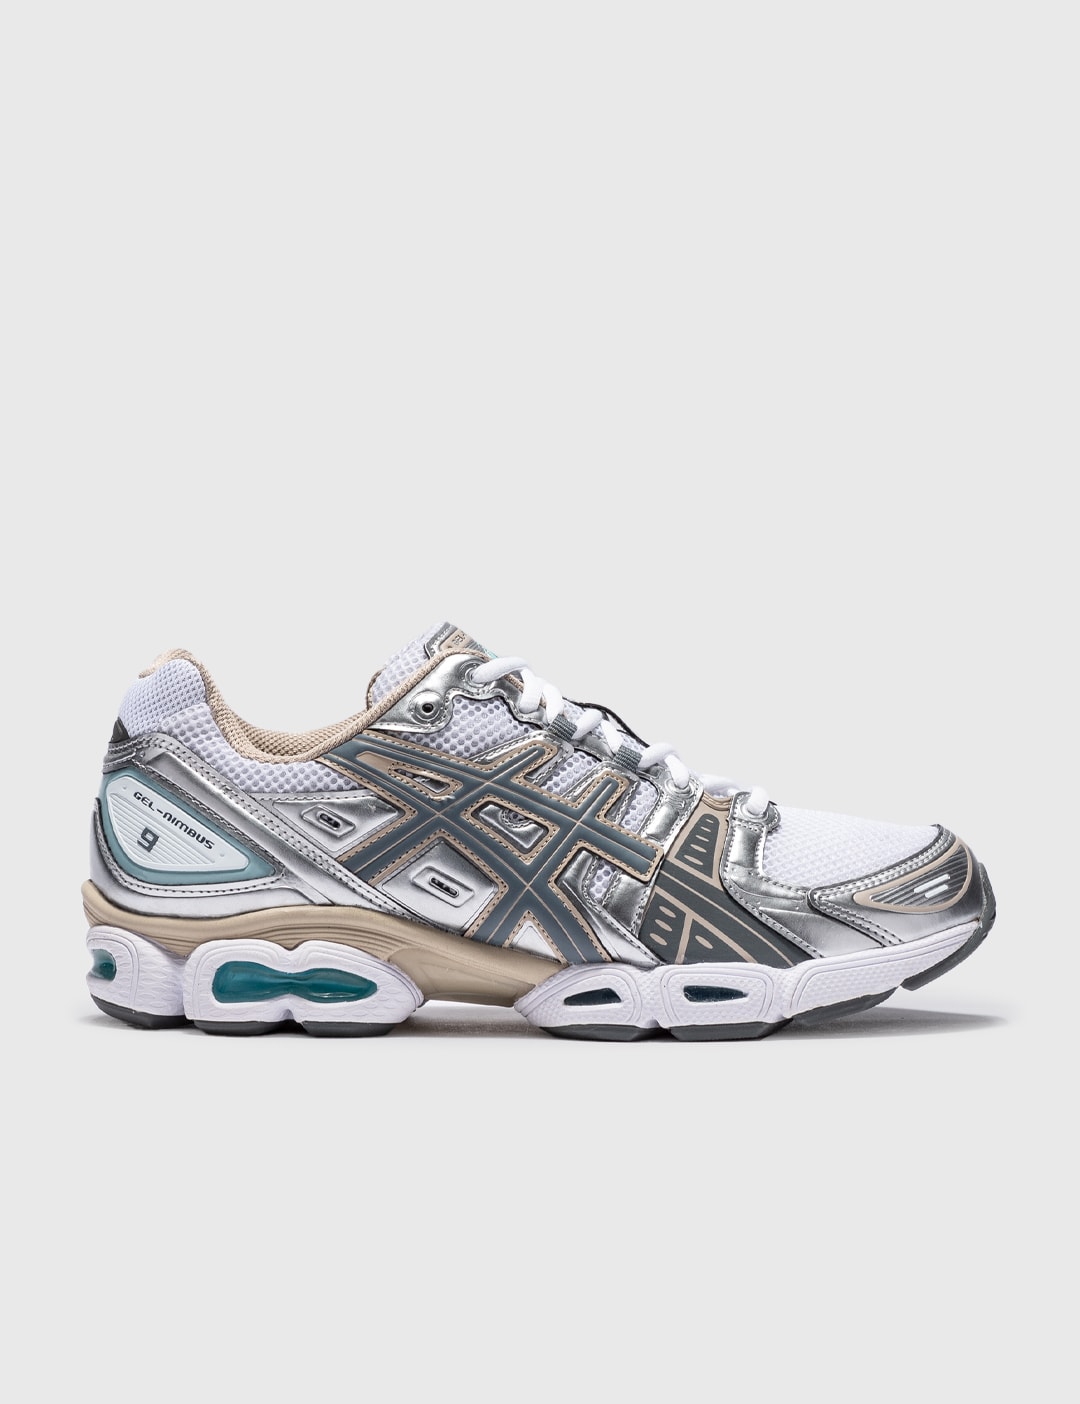 kofferbak band kalligrafie Asics - GEL-NIMBUS 9 | HBX - Globally Curated Fashion and Lifestyle by  Hypebeast